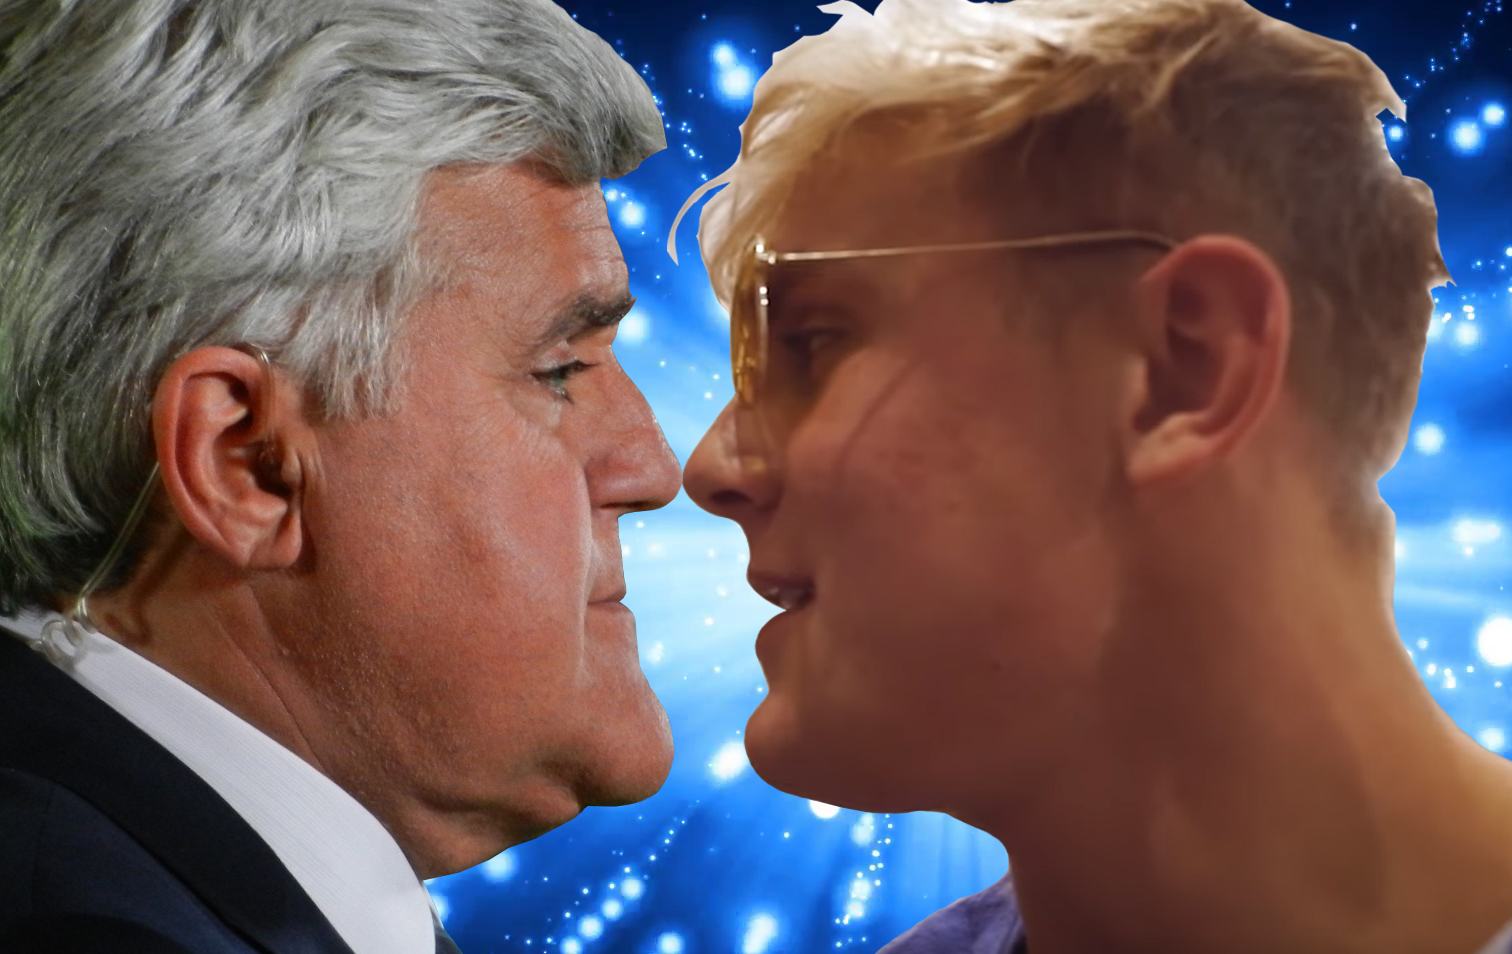 JAKE PAUL AND JAY LENO BEST MEME EVER  MEET FACE TO FACE AND THE UNTHINKABLE HAPPENS